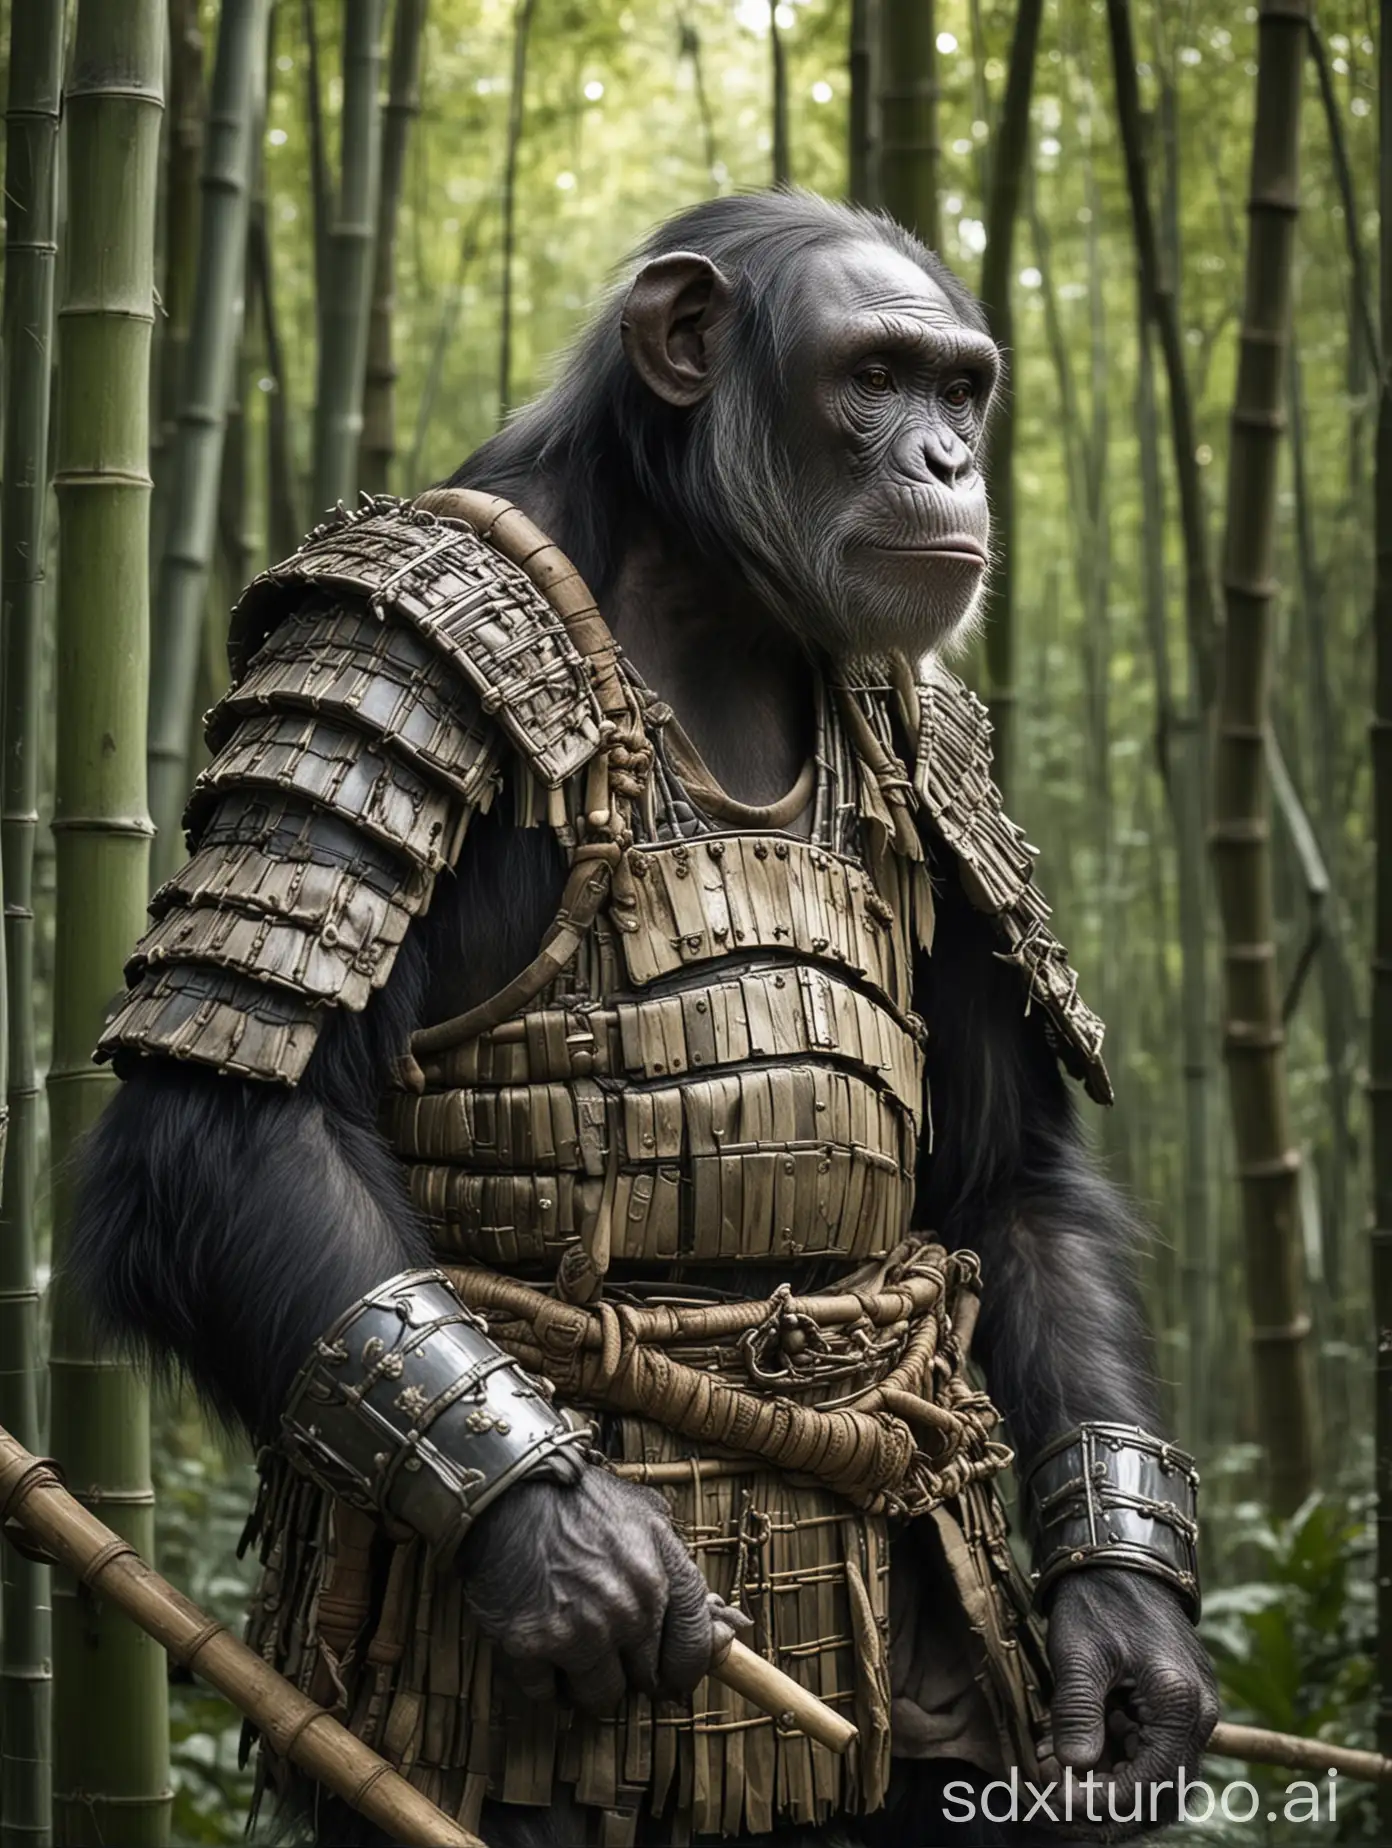 very old and grey chimpanzee, wearing samurai armor, in a bamboo forest